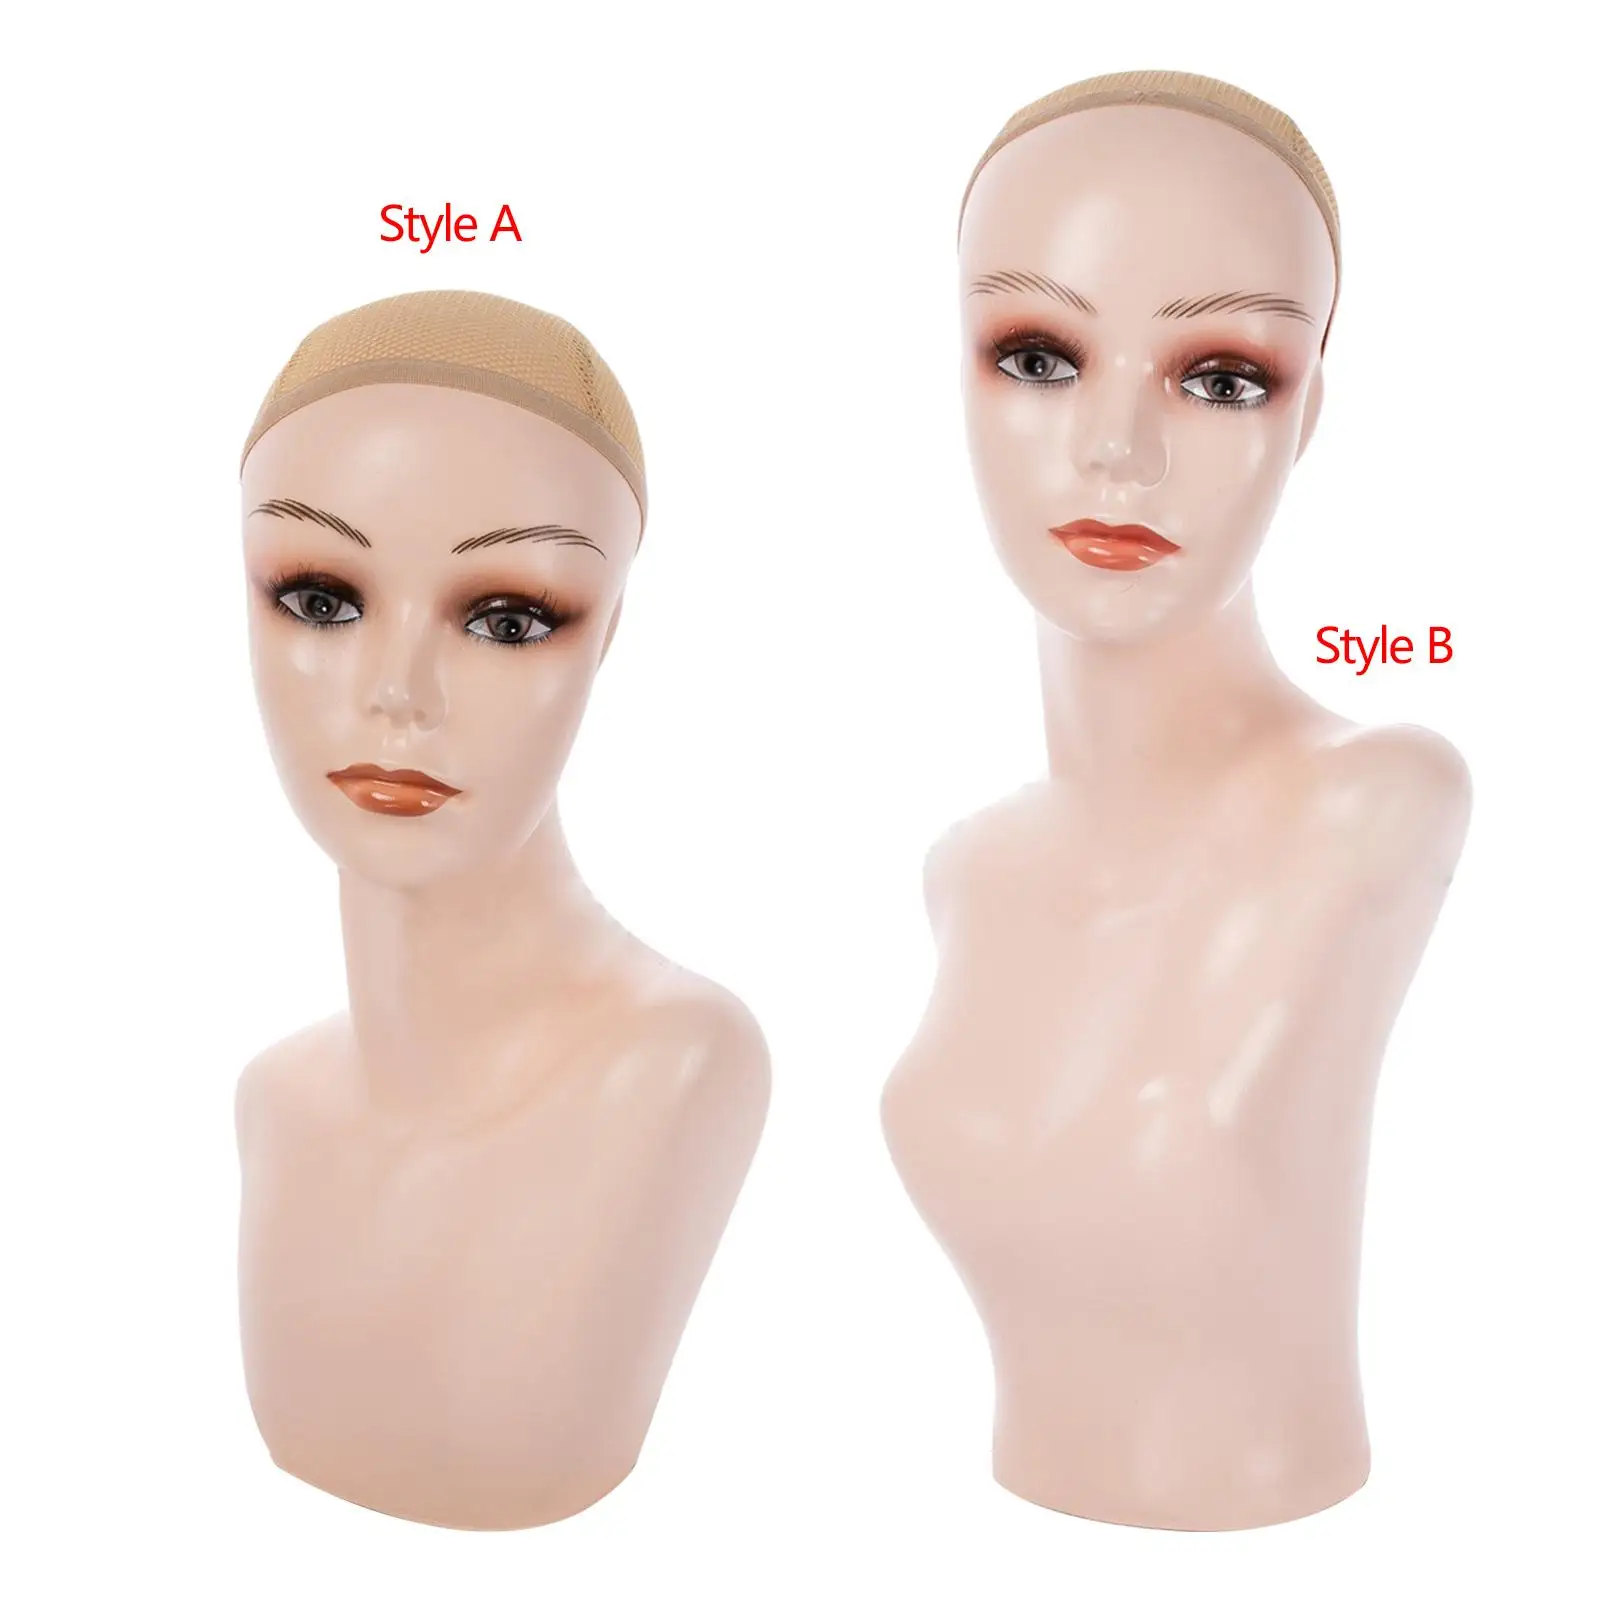 

Female Mannequin Head Durable Stable Base Wig Display Stand for Hats Jewelry Hairpieces Wigs Displaying Making Styling Glasses